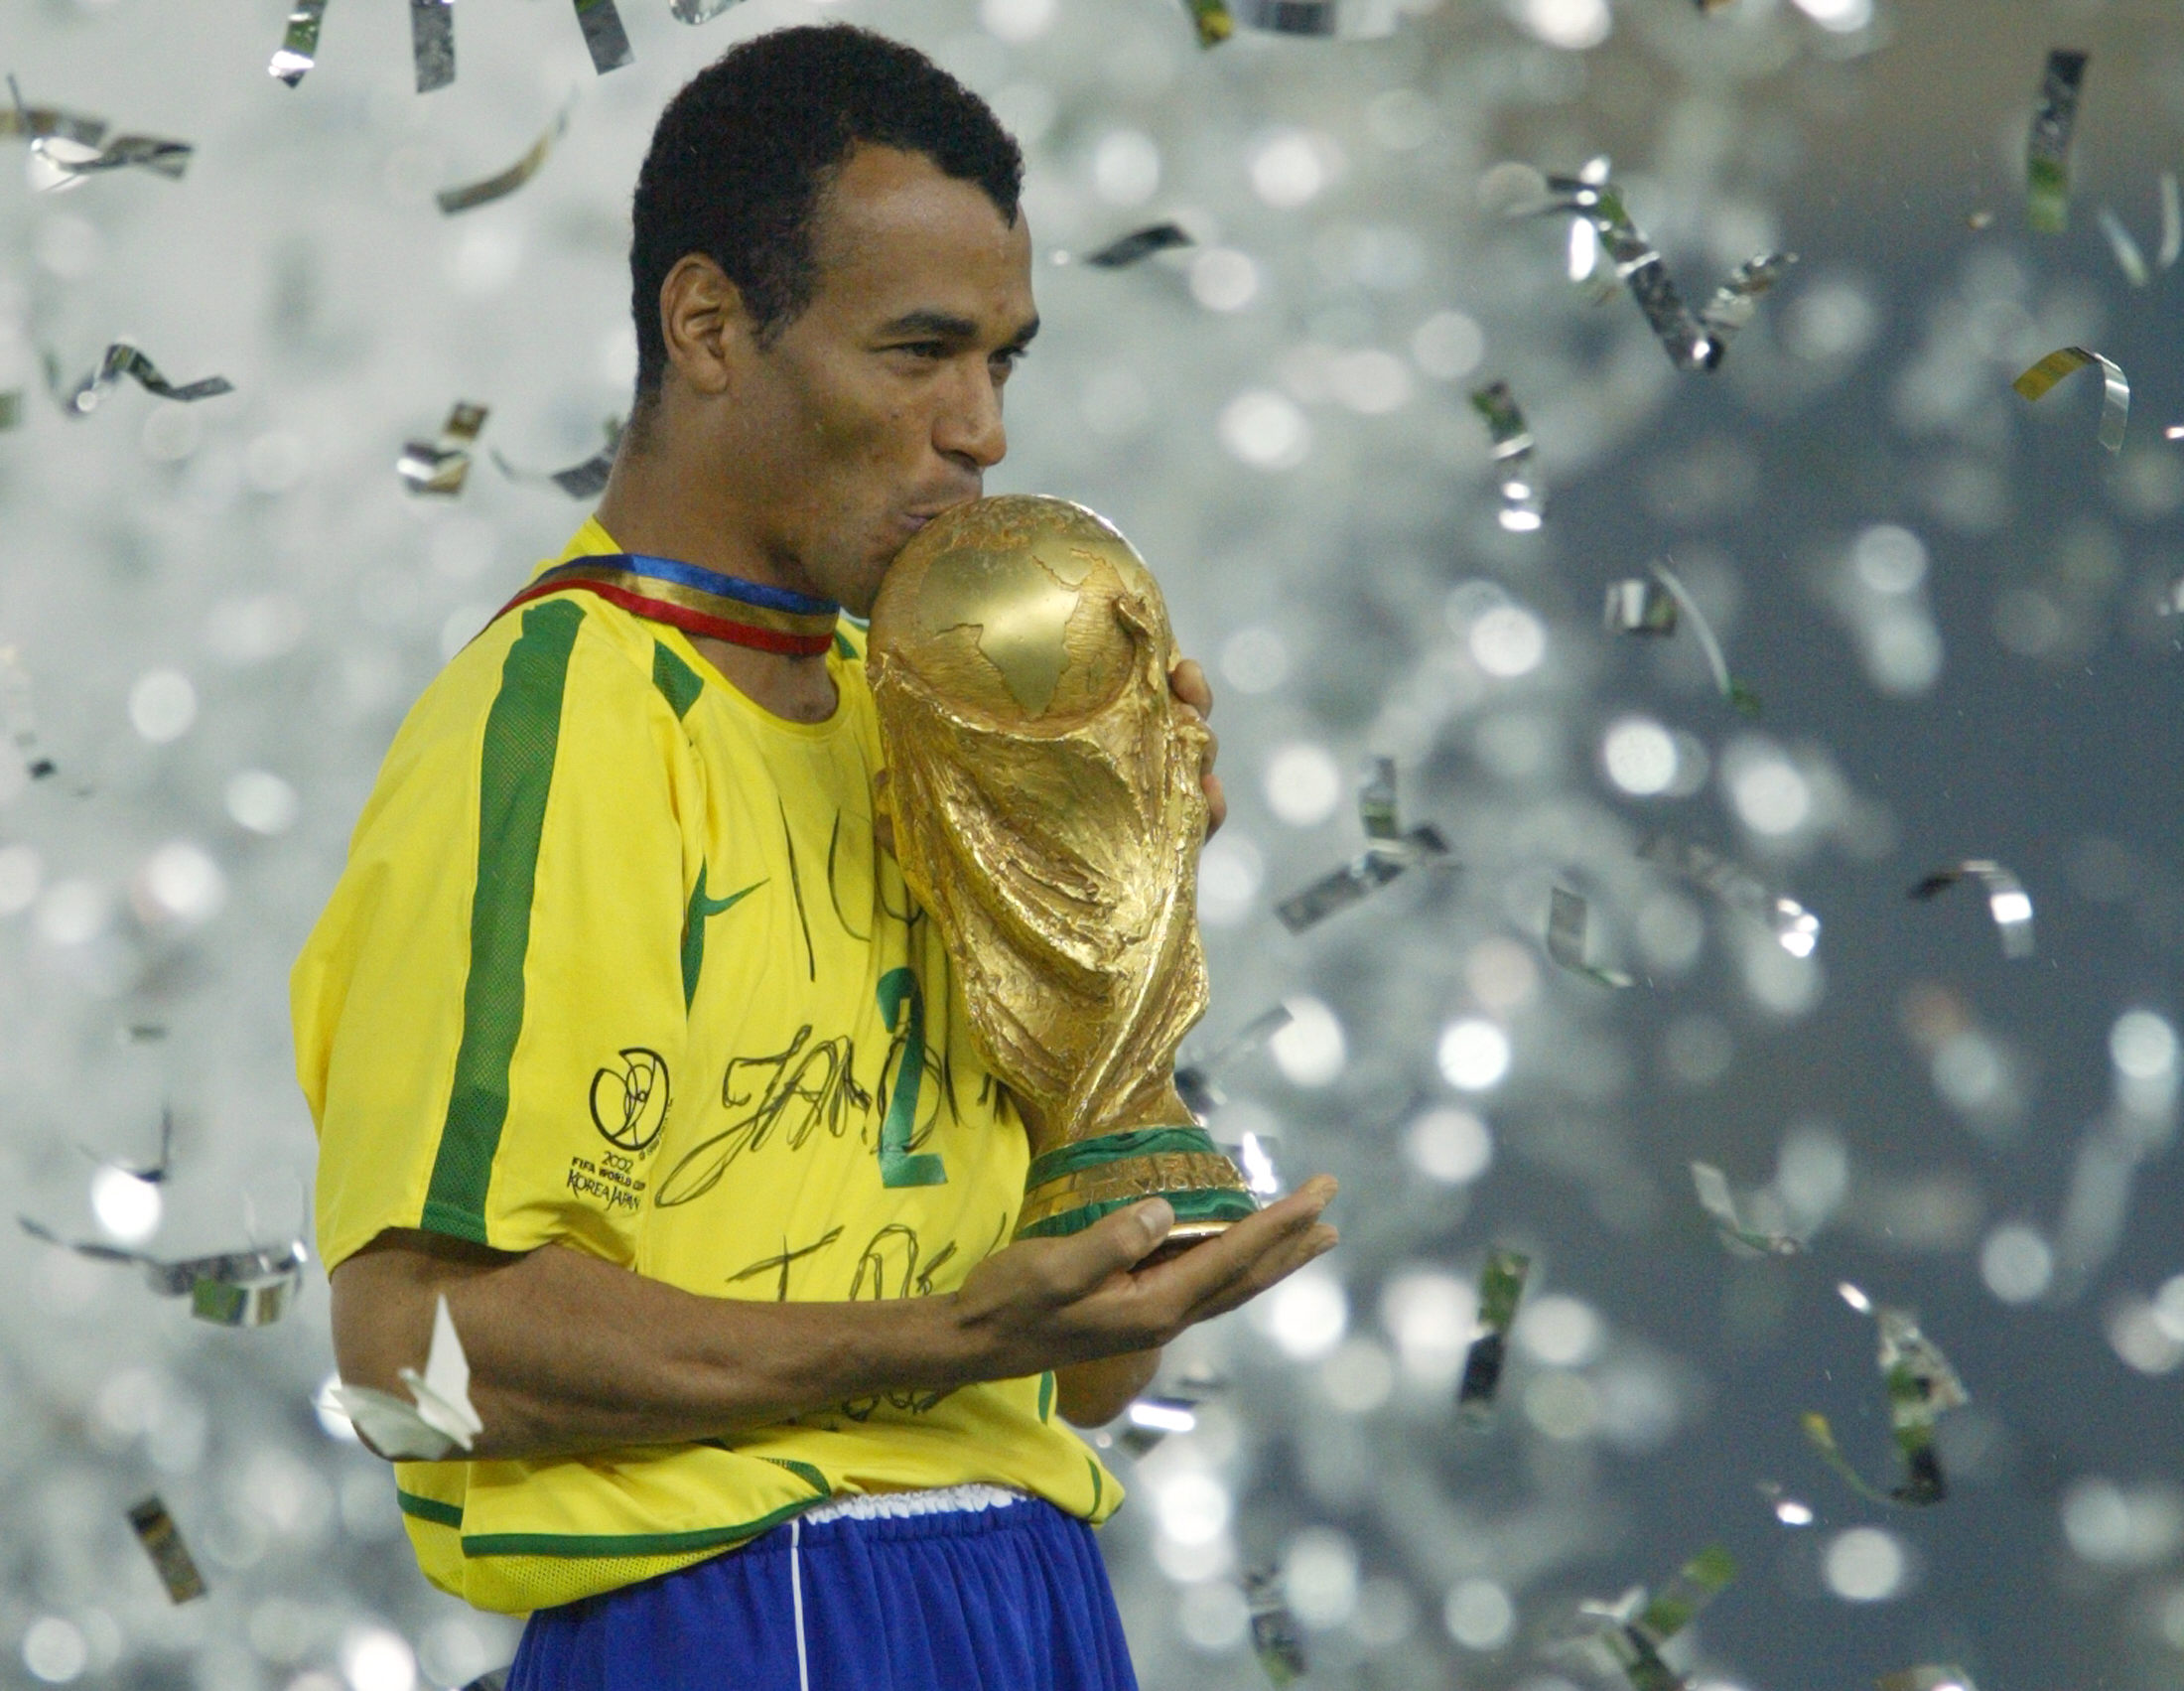 Brazil’s team captain and defender Cafu kisses the